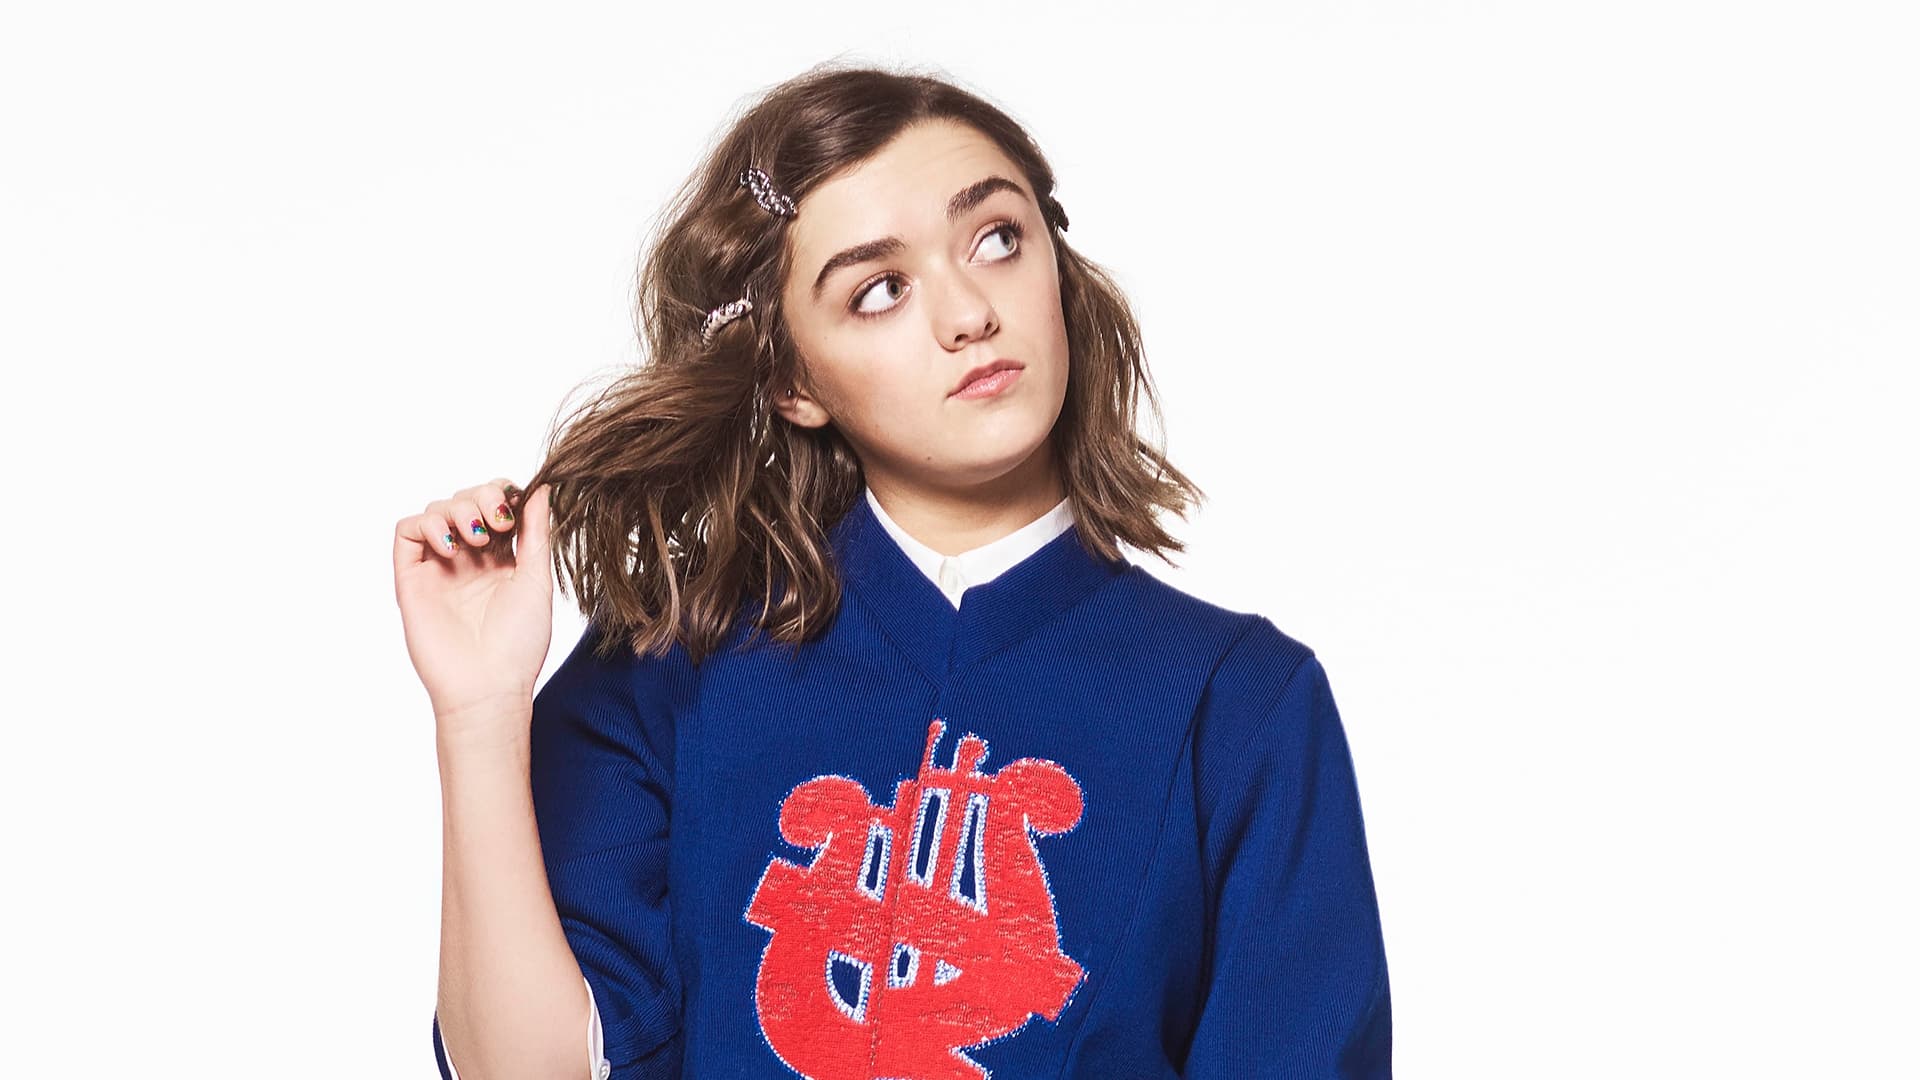 Maisie Williams wallpaper HD HIgh Quality Resolution Download